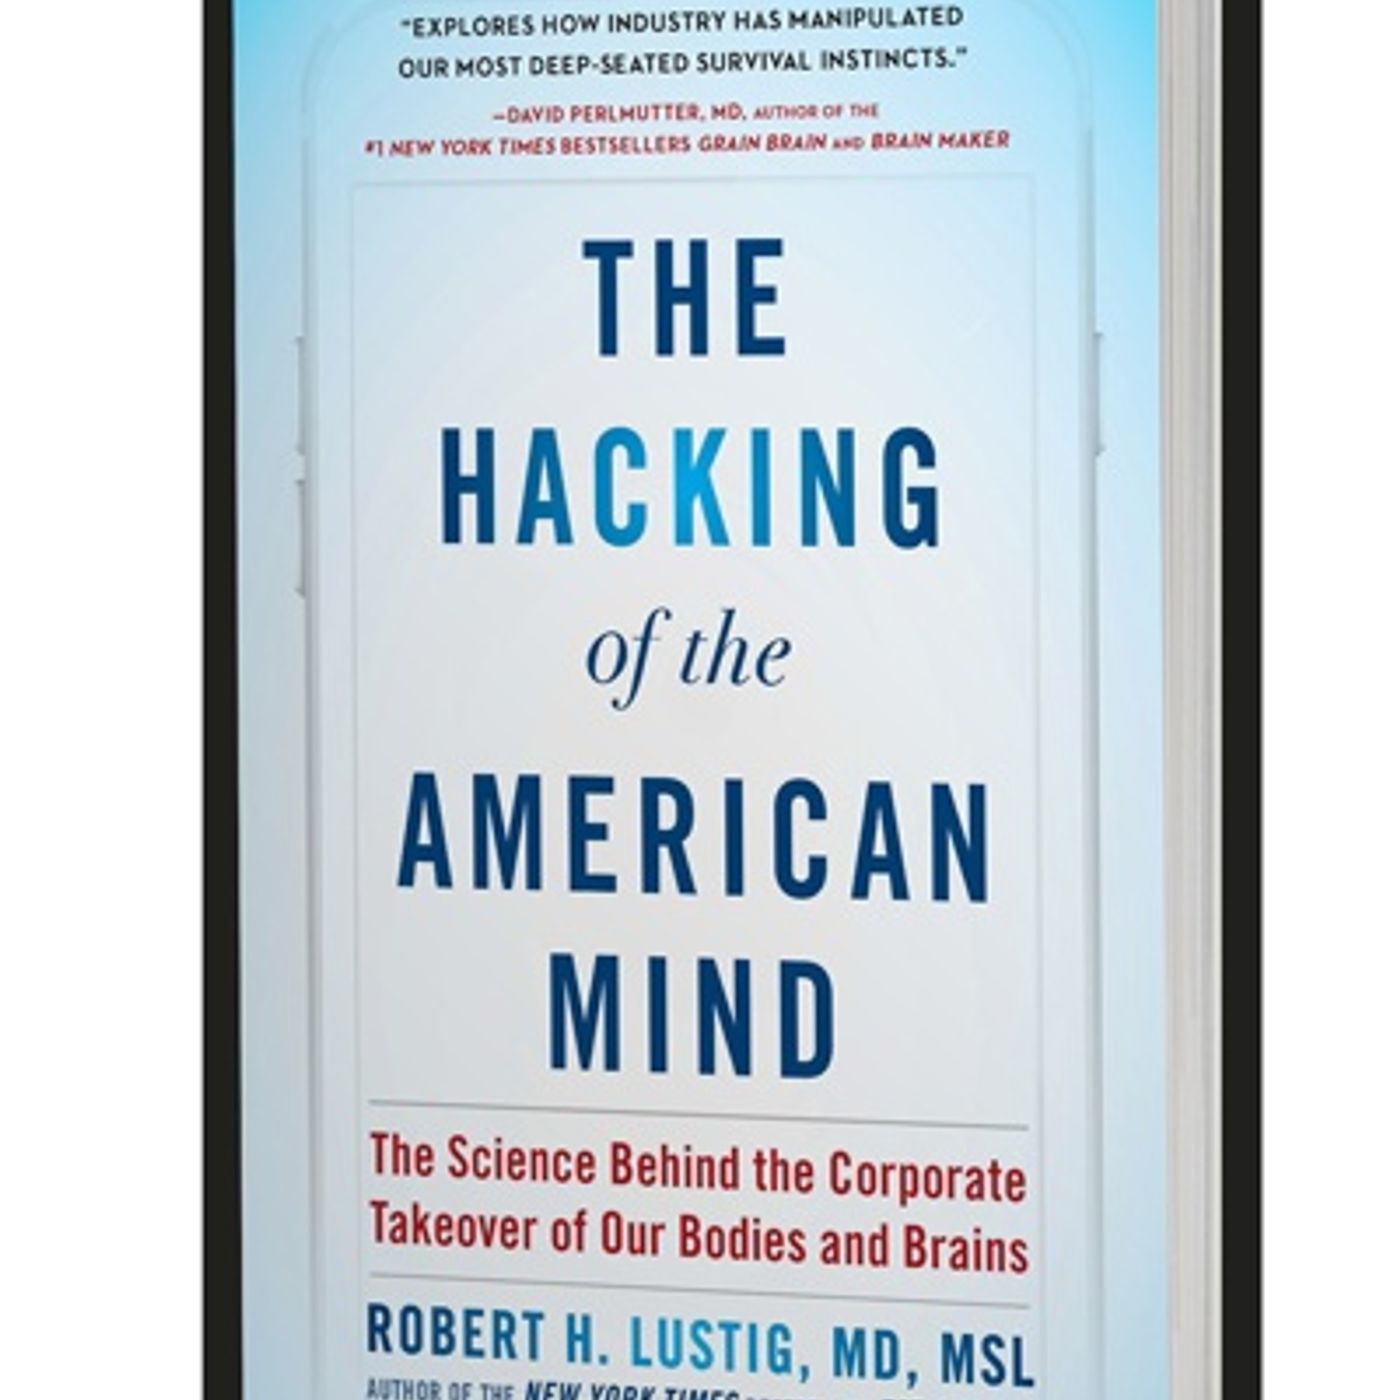 Dr Robert Lustig - The Hacking of the American Mind